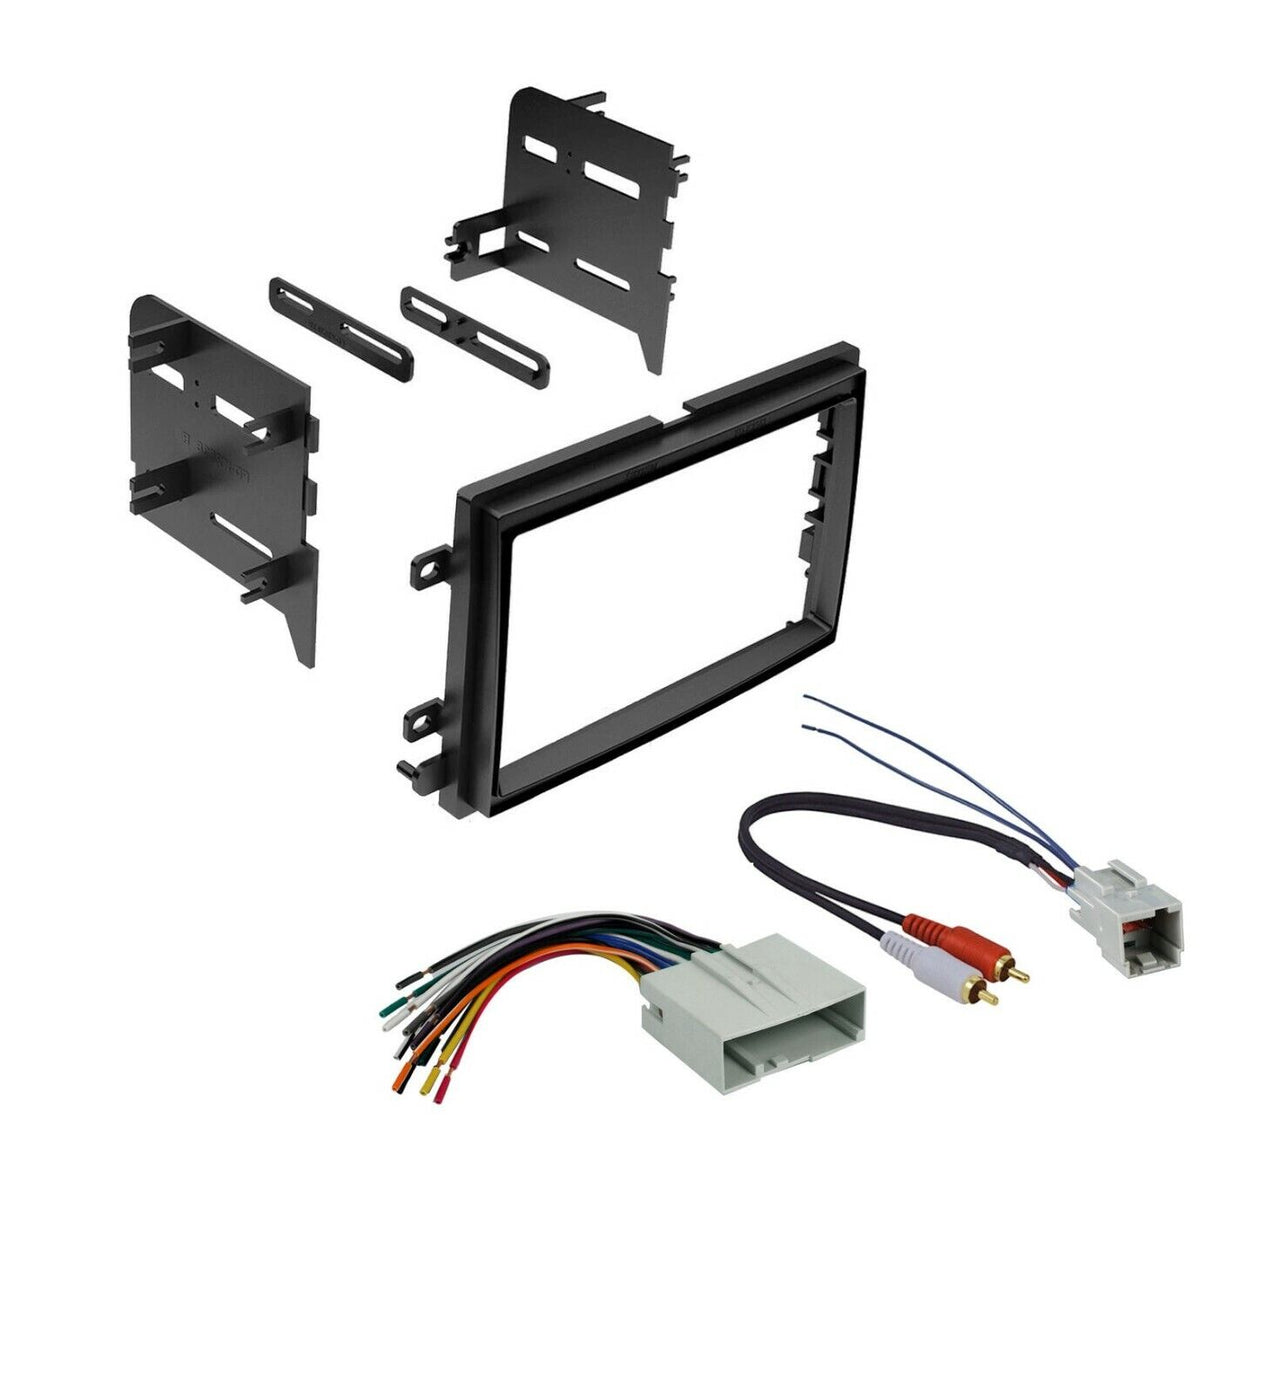 American Terminal Compatible with select 2004-2016 vehicles from Ford, Mercury, Lincoln Double DIN Stereo Harness & Antenna Radio Install Dash Kit Package